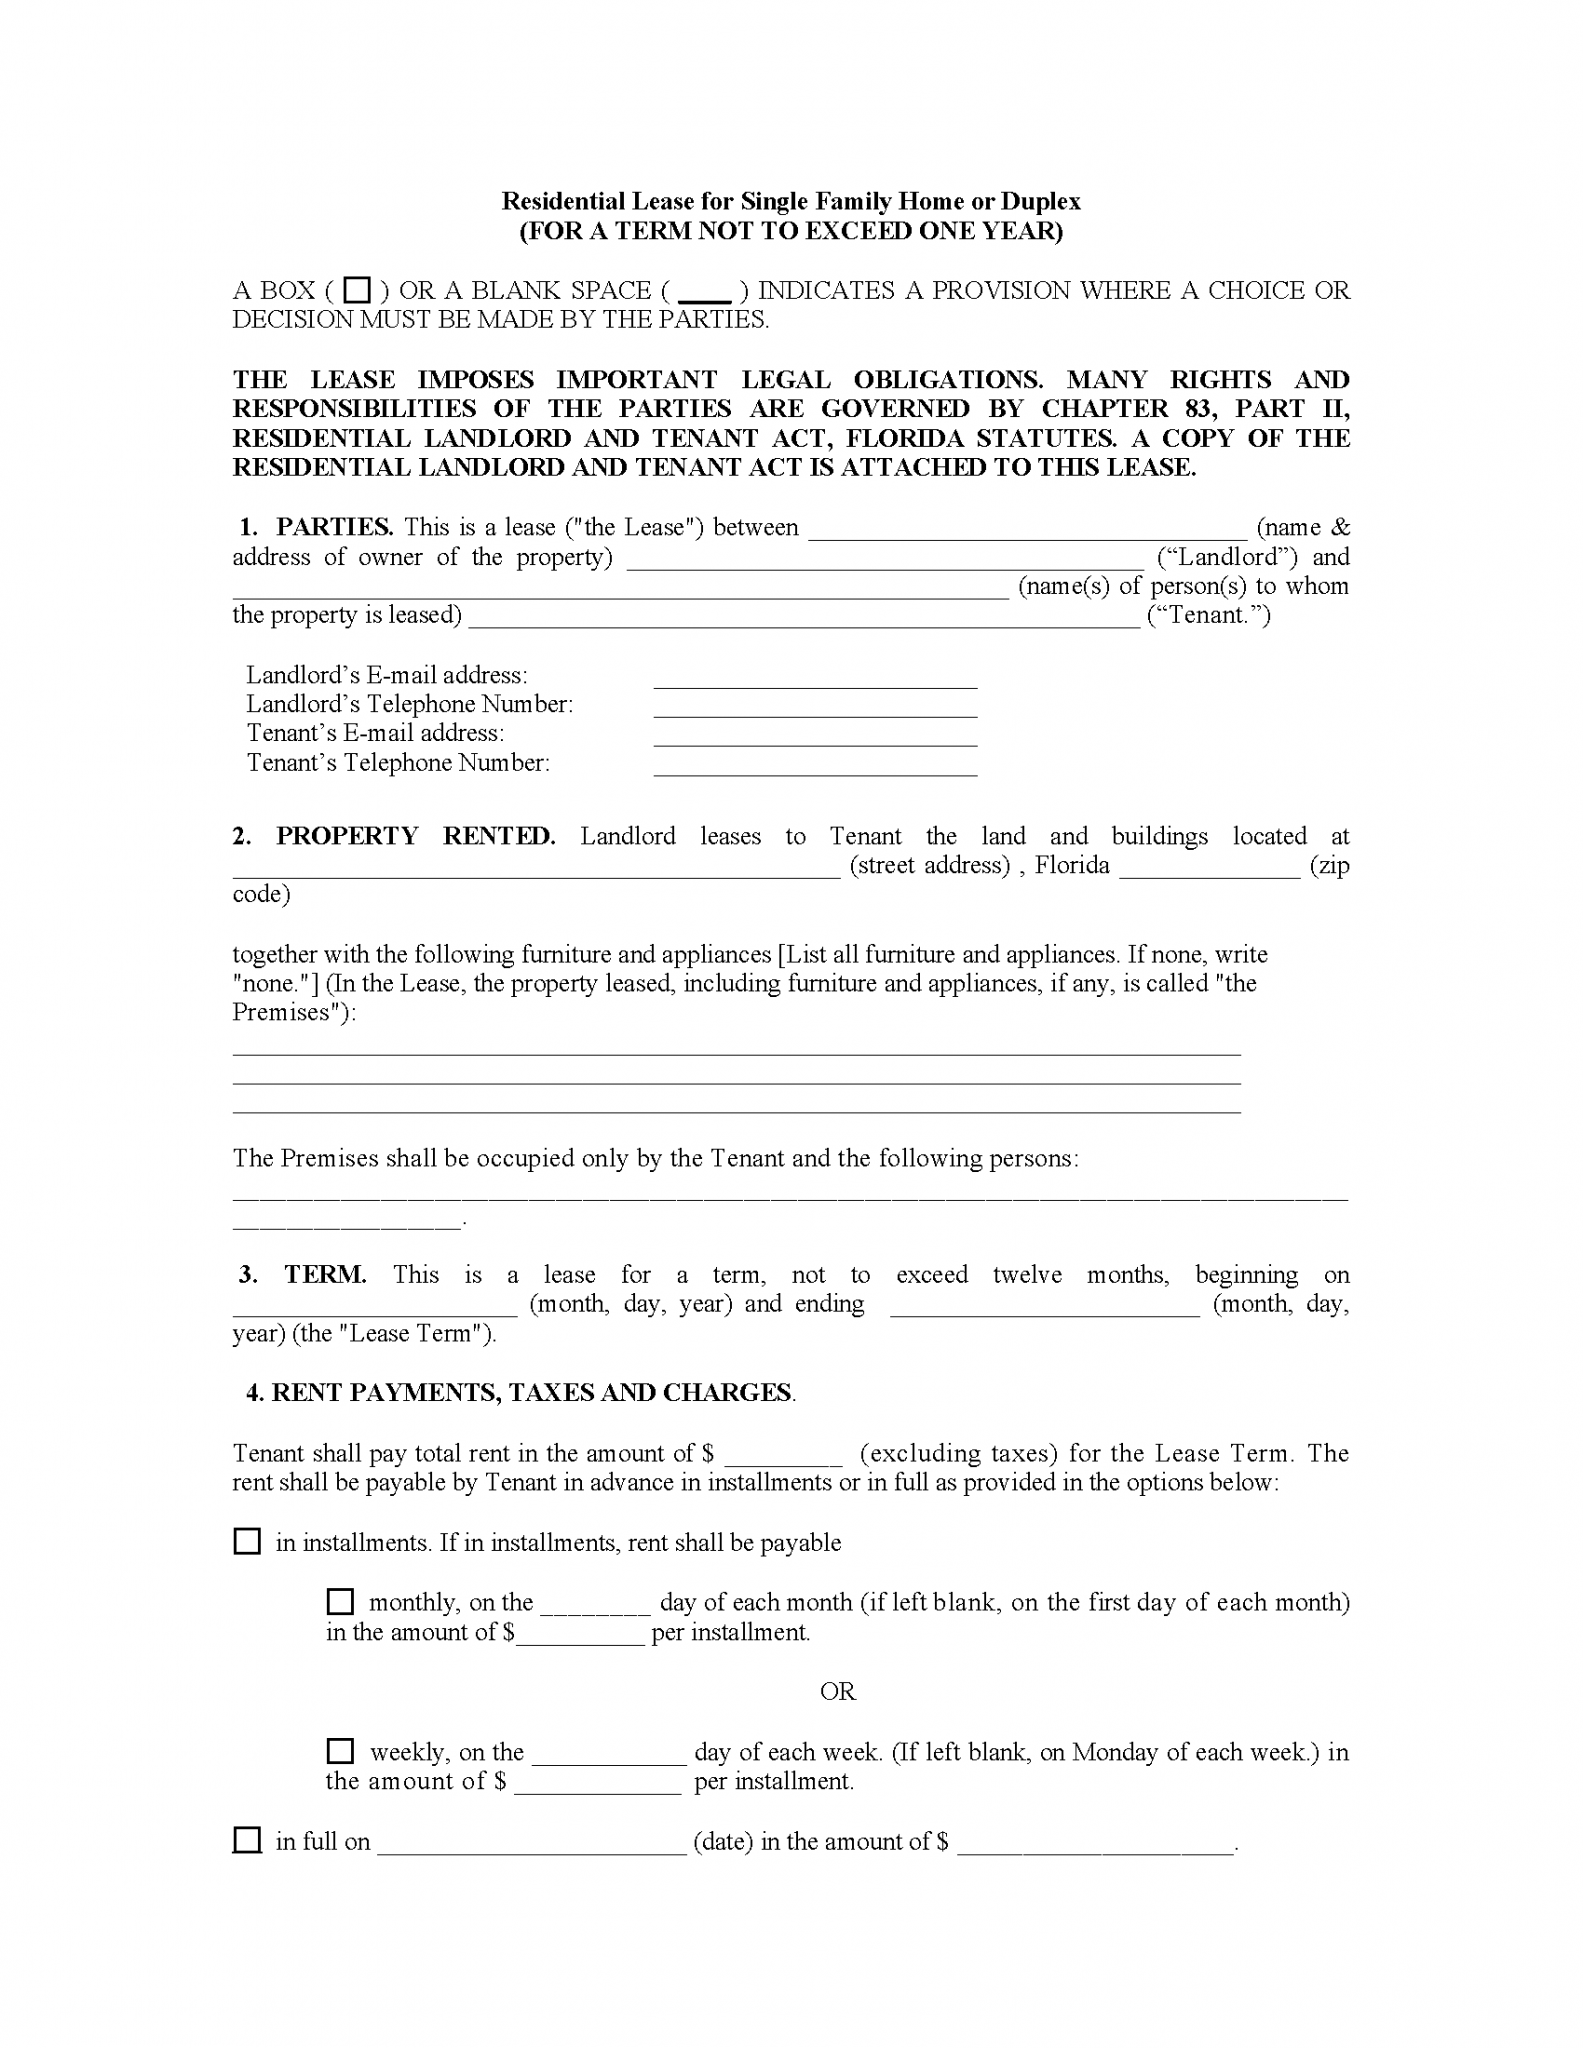 assignment of lease florida